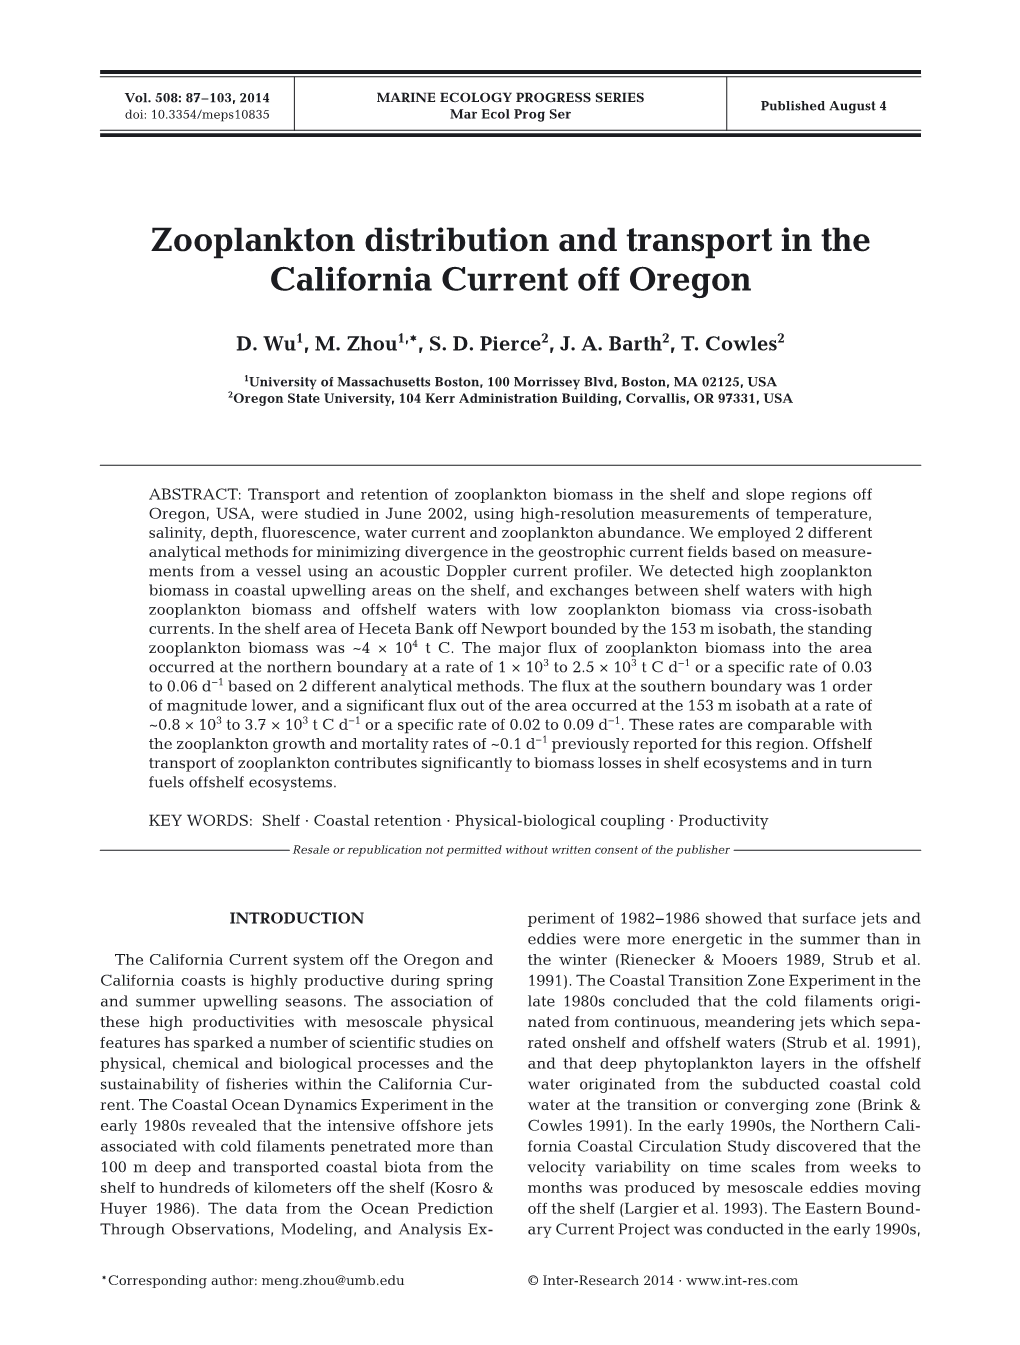 Zooplankton Distribution and Transport in the California Current Off Oregon